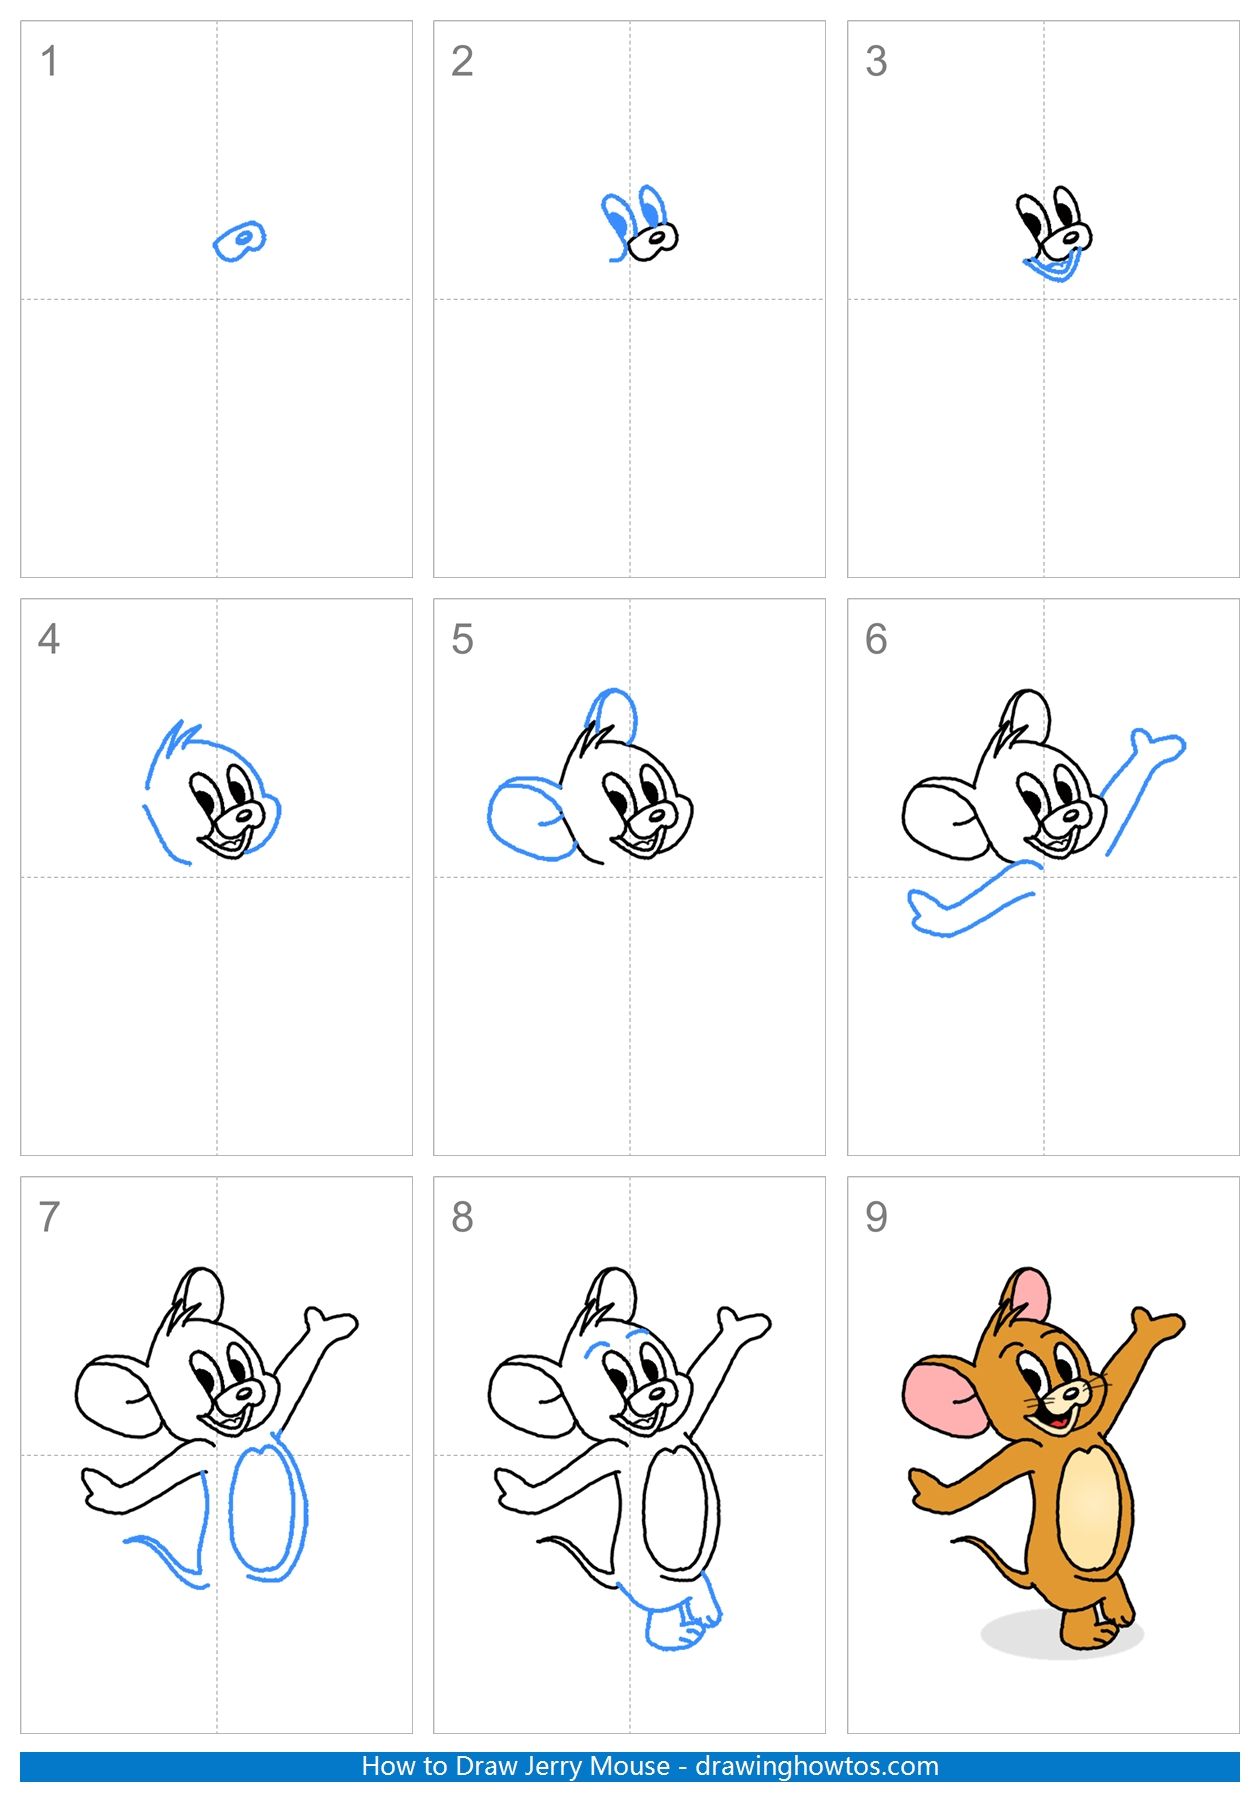 How to Draw Jerry Mouse Step by Step Easy Drawing Guides Drawing Howtos